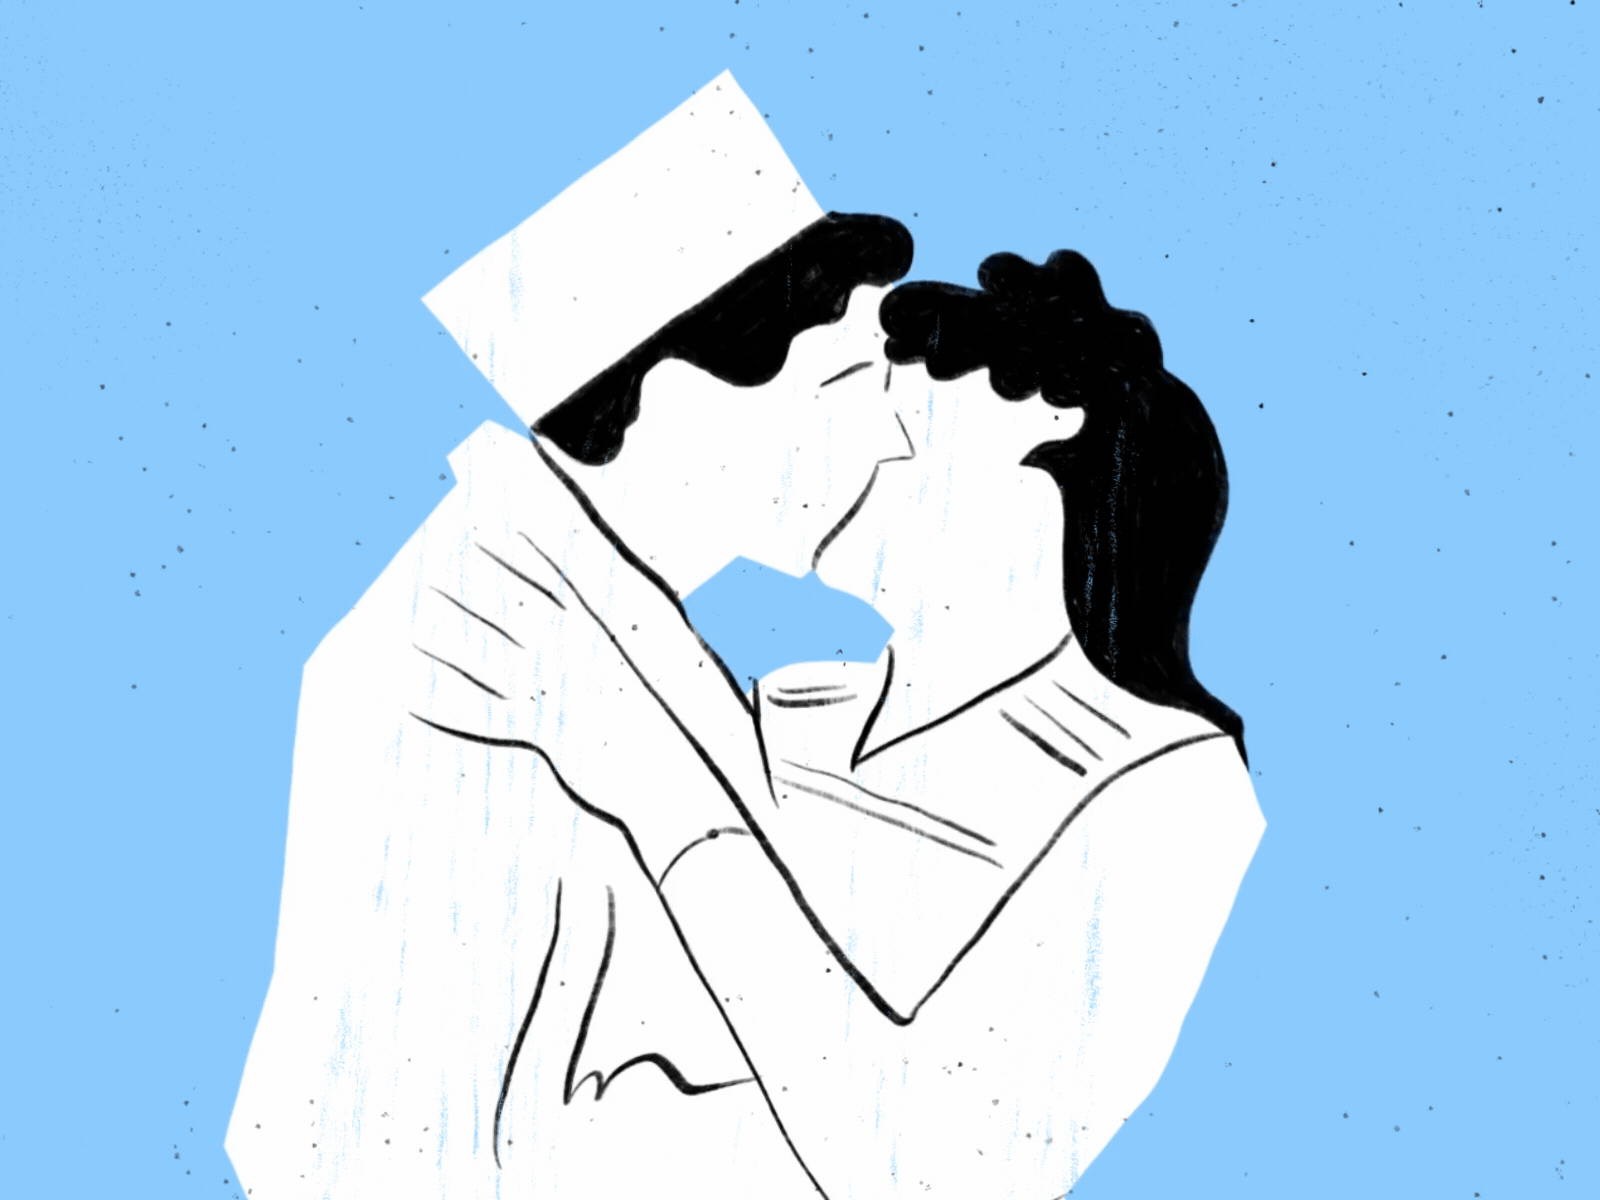 Morricone's Suite - Kisses 2d animation blackandwhite cel animation character cinema frame by frame gif illustration kiss loop love morphing motion design movies rotoscope transition